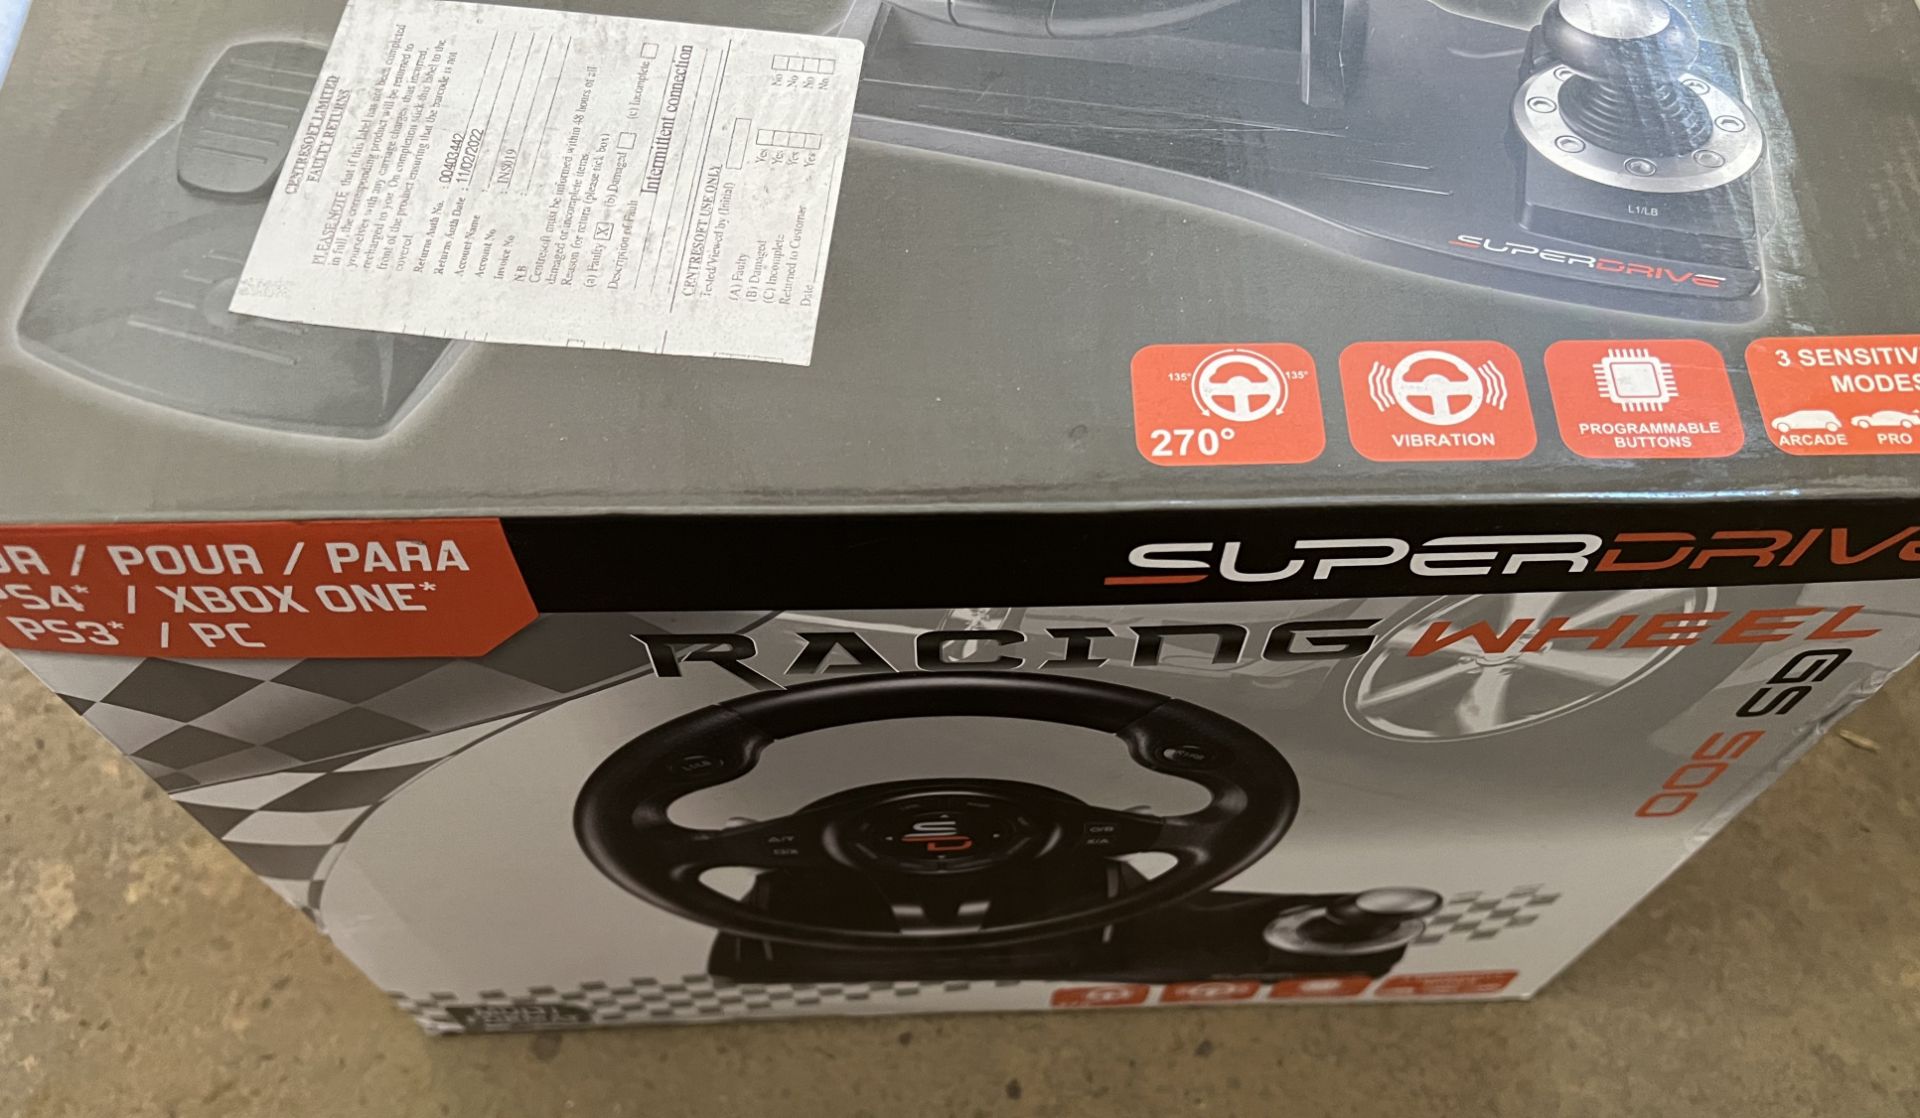 RAW RETURN -SUBSONIC GS500 Drive Pro Sport Wheel & Pedals - PS4/PS3/XBOX ONE/PC/SWITCH -RRP NEW £75!